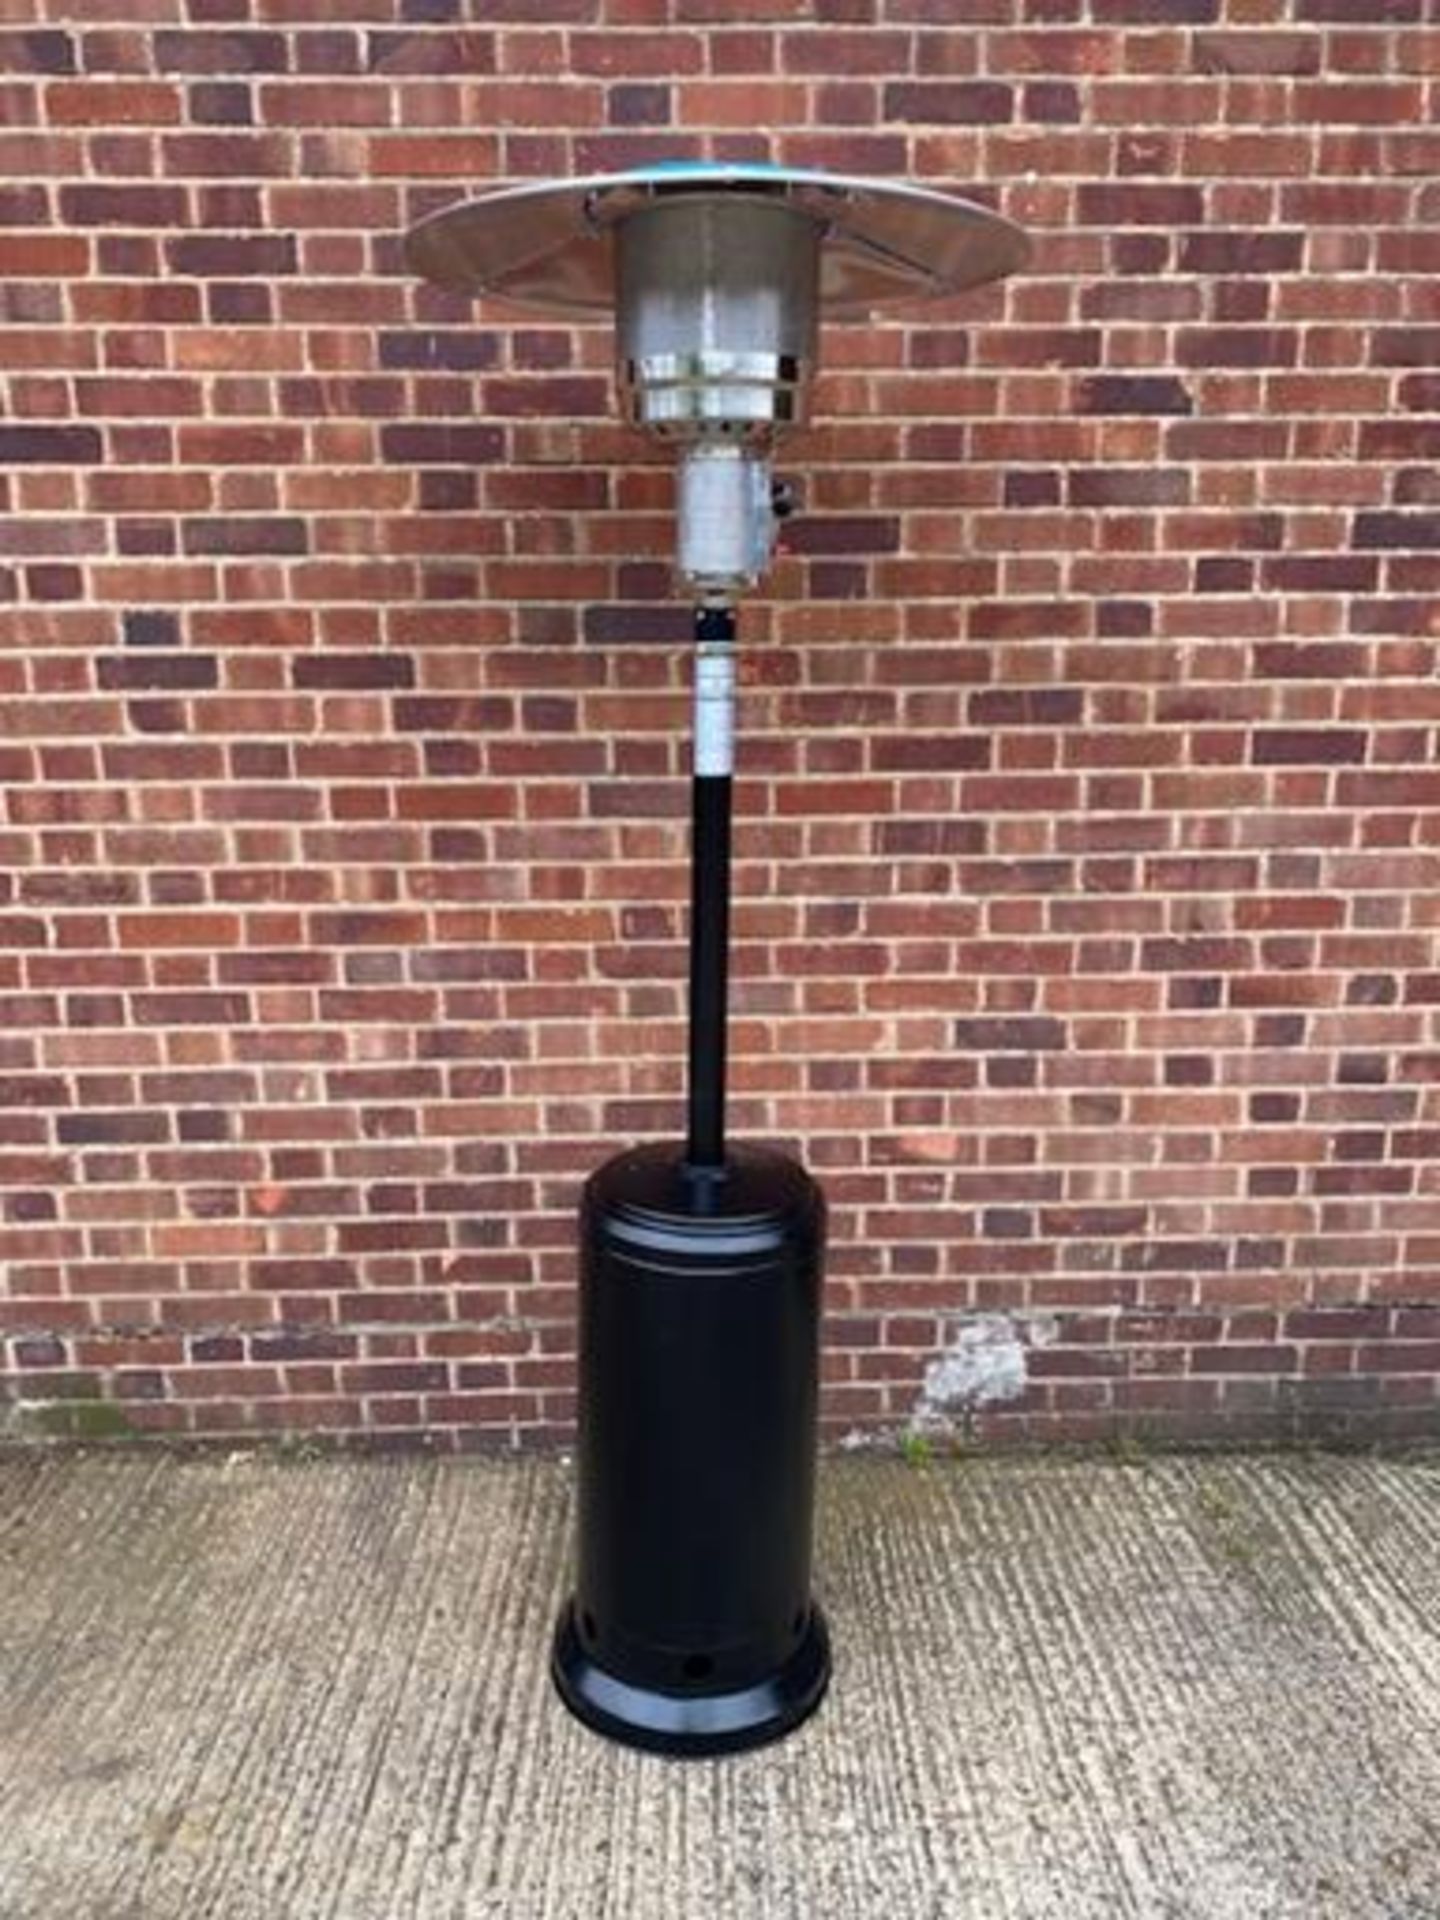 + VAT Brand New Chelsea Garden Company Garden Patio Heater With Cover - Item Is Available From - Image 3 of 9